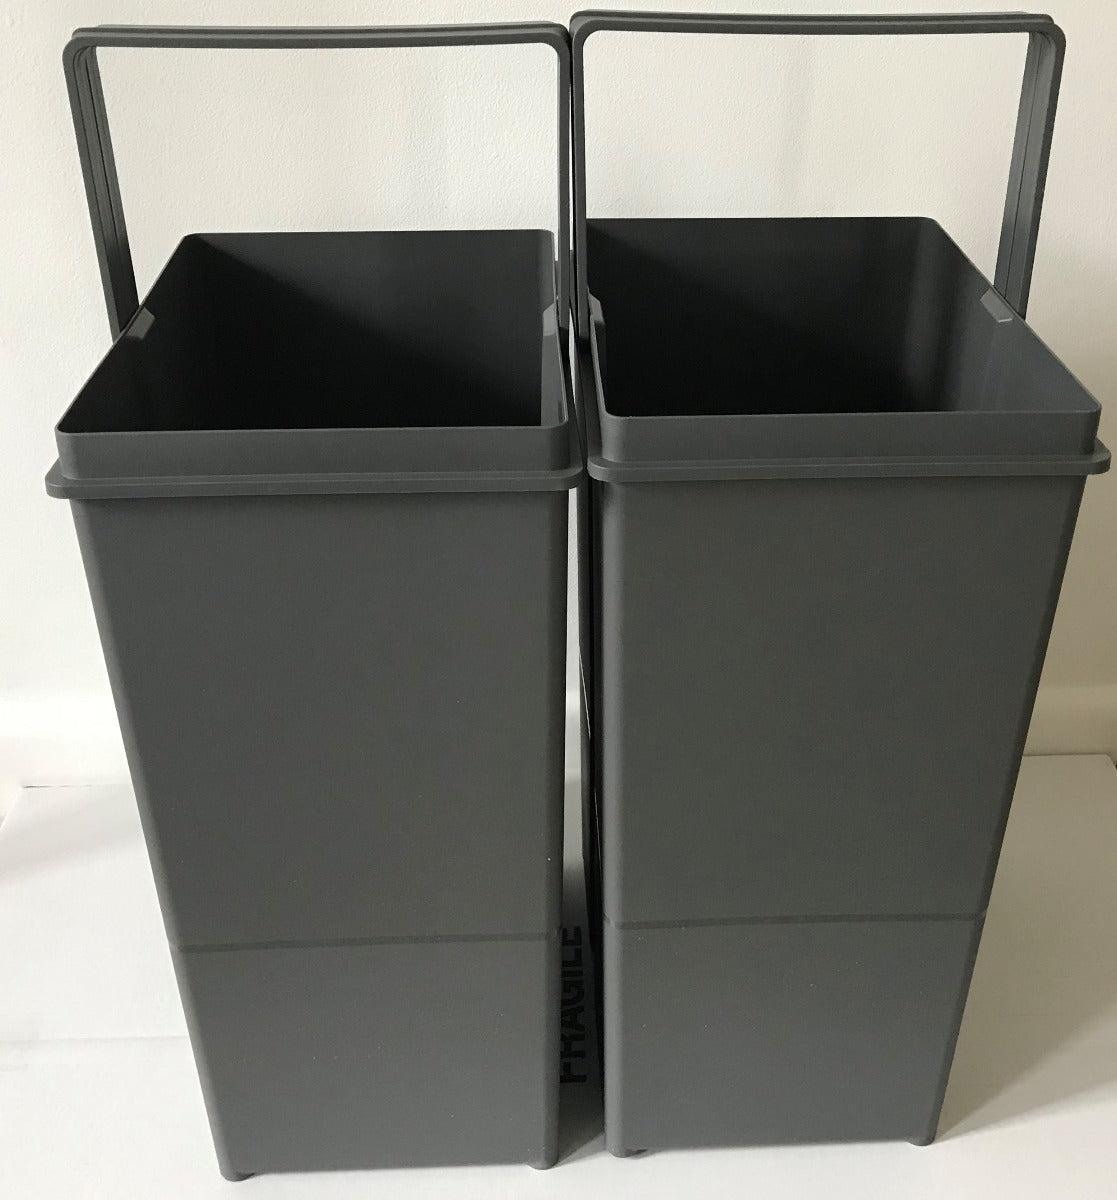 Gollinucci Linea 580 Plus 2 Compartment 58L Recycler with OVERALL LID : 450mm Door